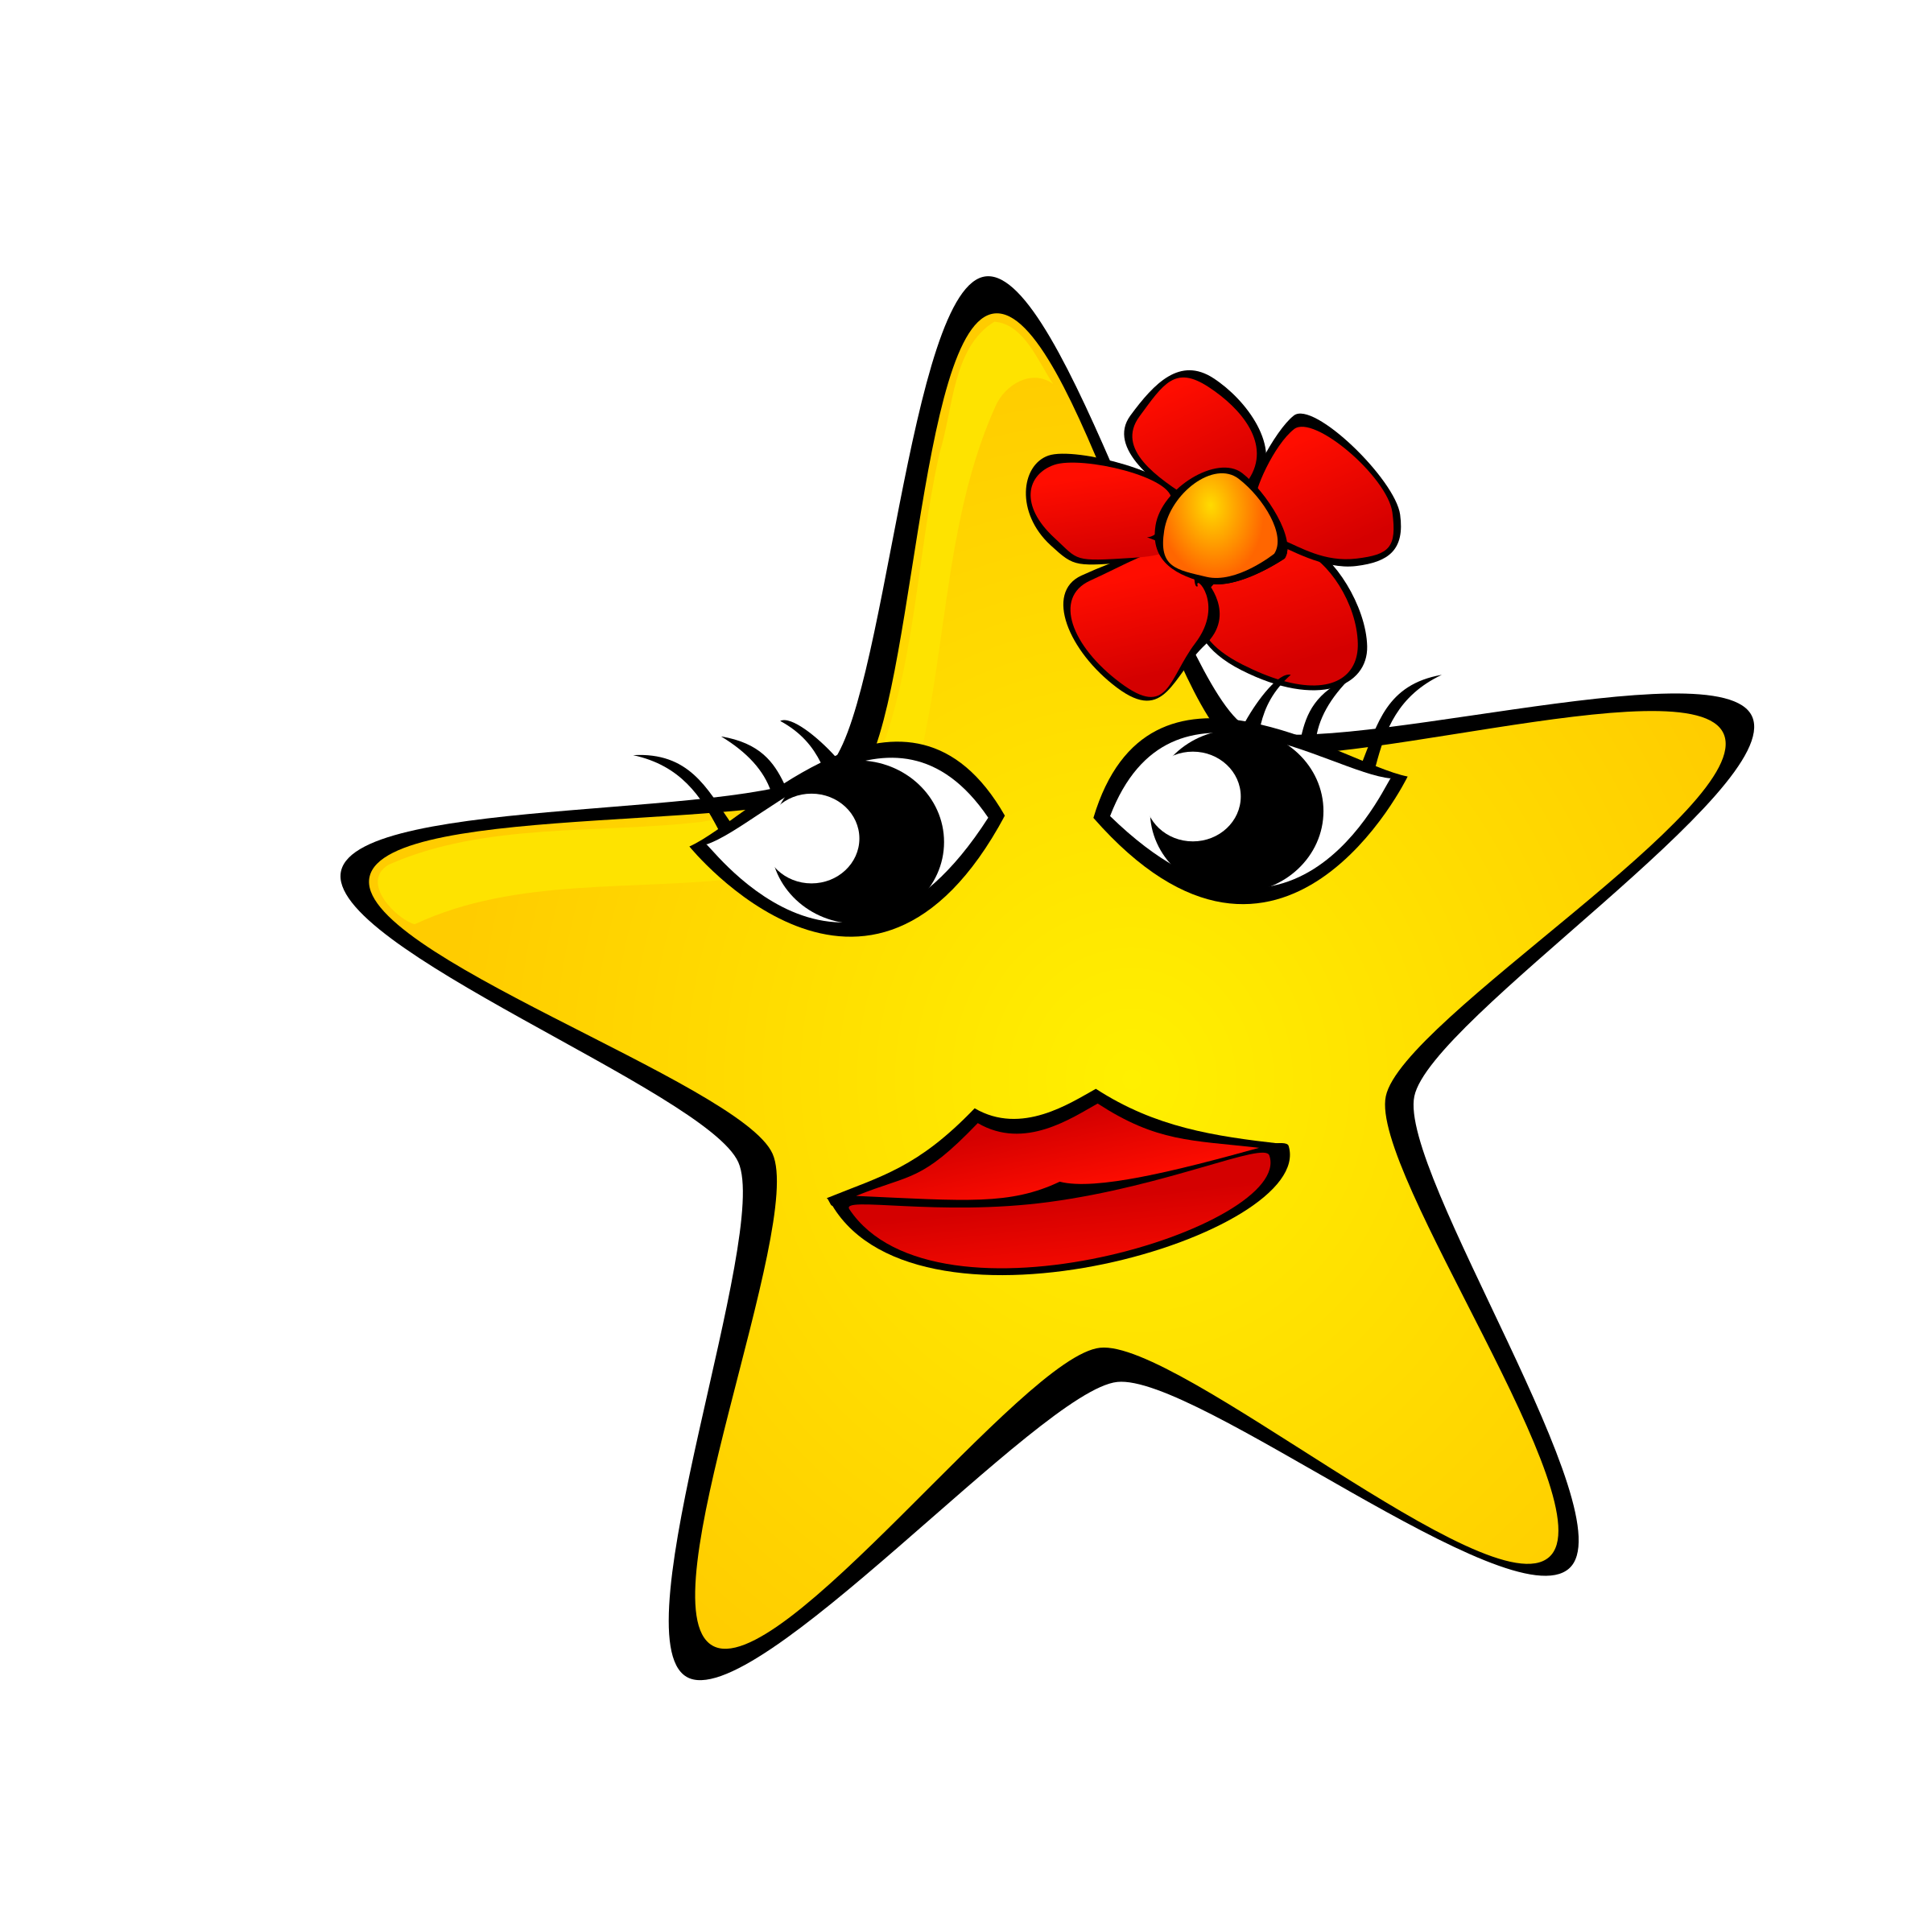 Starry big image png. Clipart star night sky